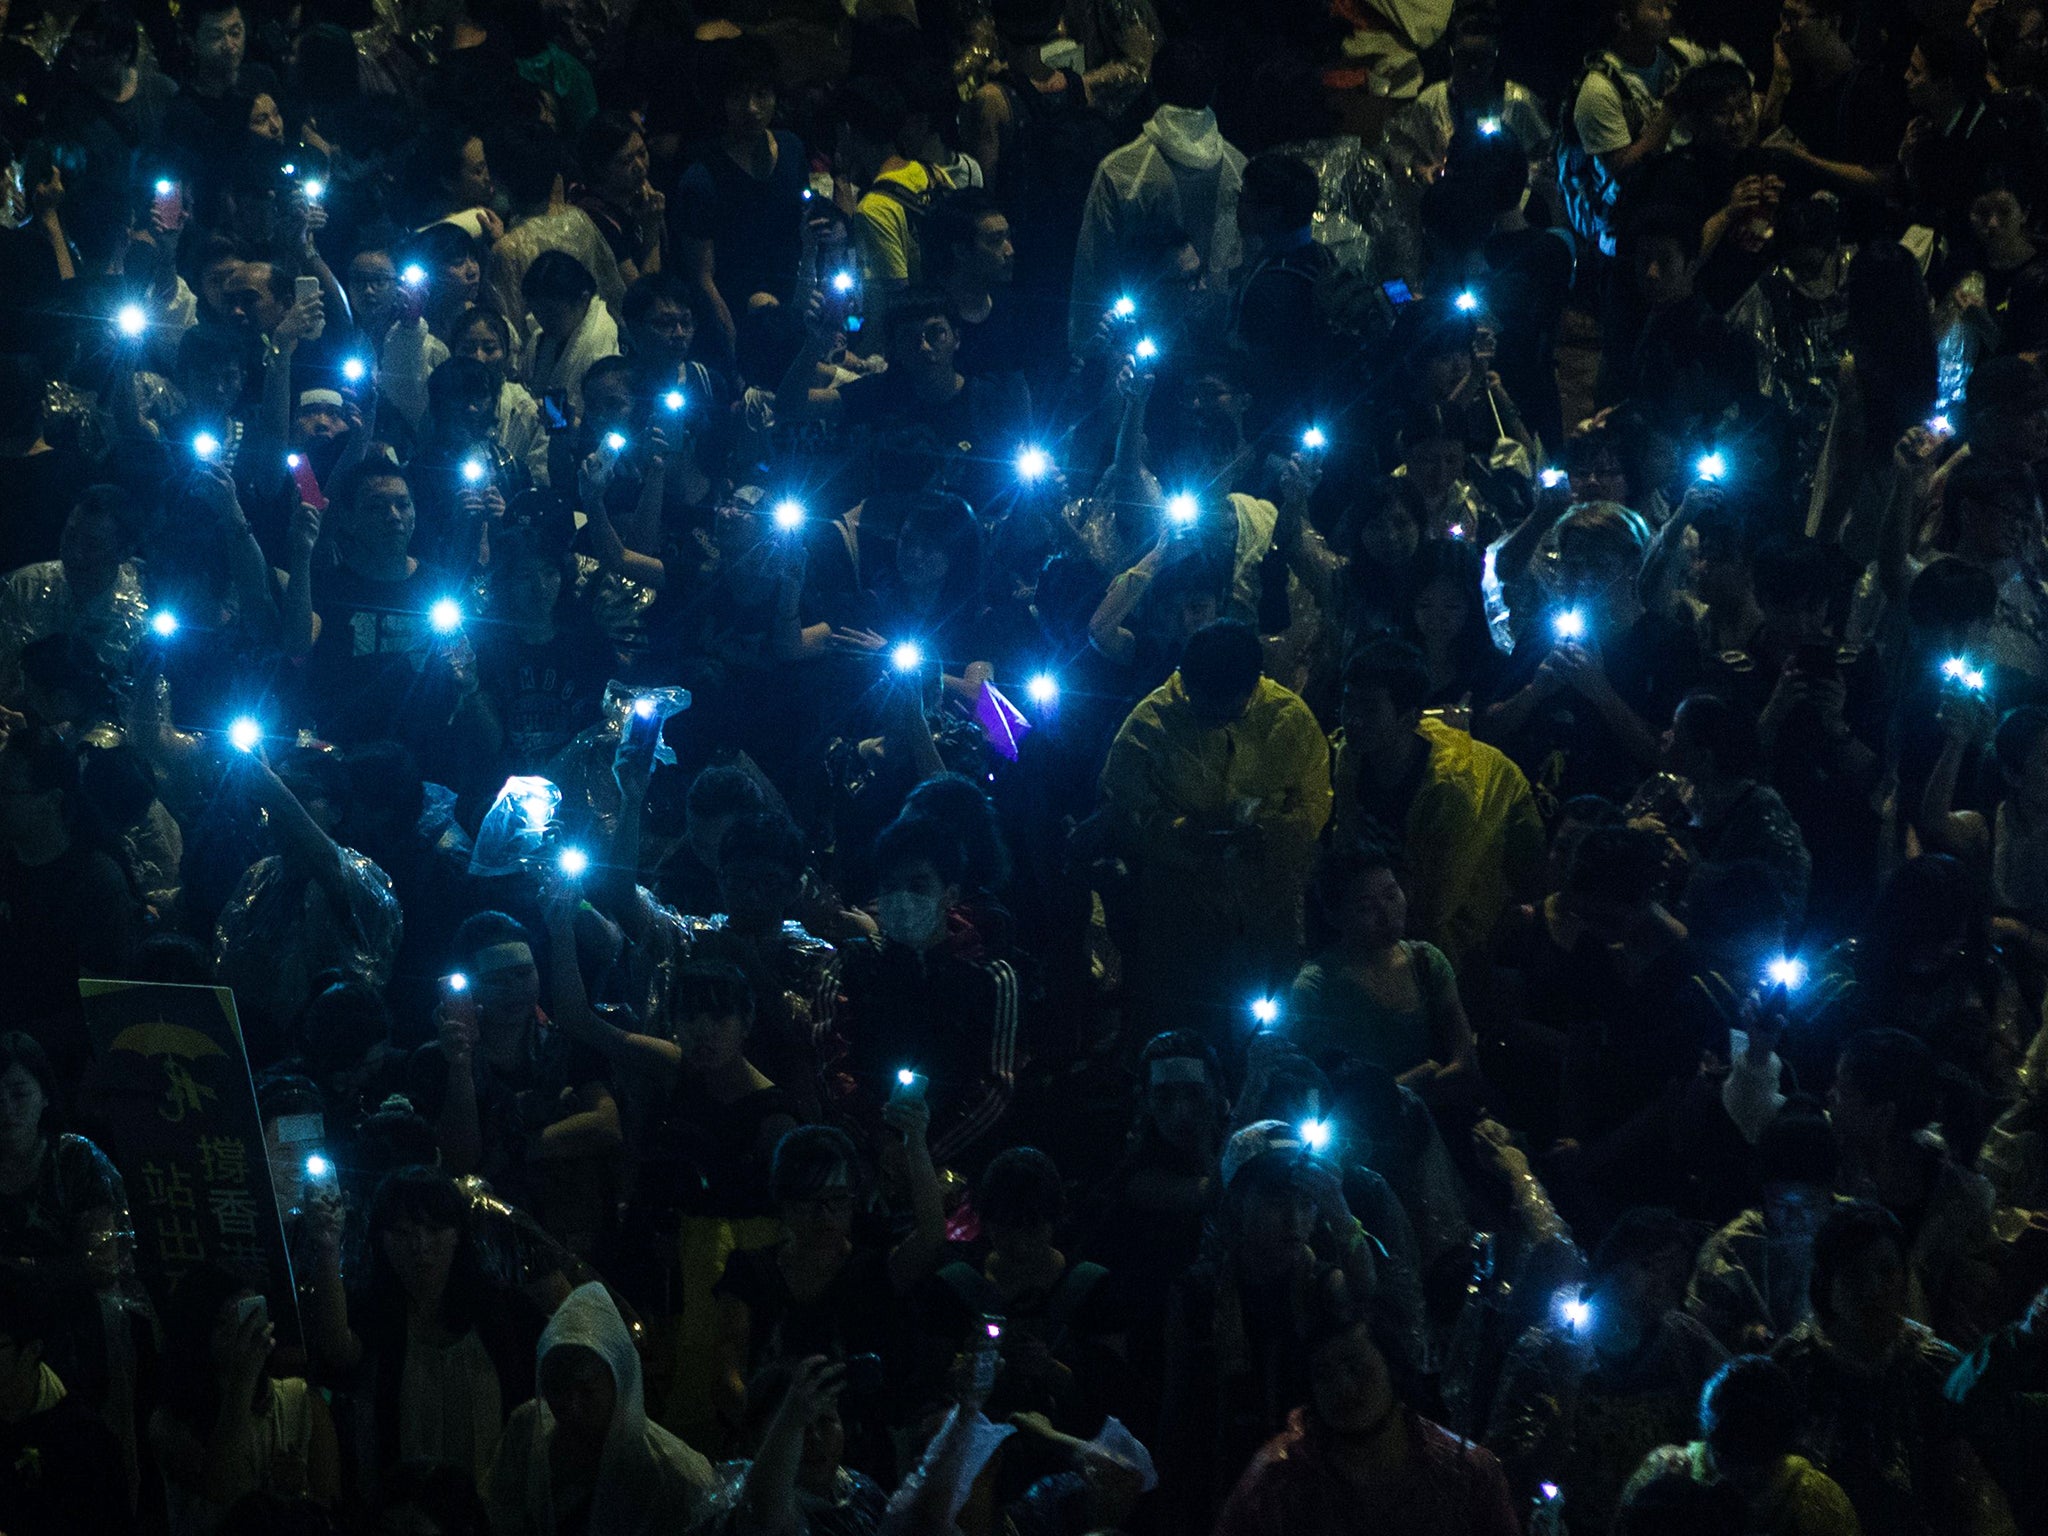 Pro-democracy protesters hold up their mobile phones after heavy rain in Hong Kong. Hong Kong has been plunged into the worst political crisis since its 1997 handover as pro-democracy activists take over the streets following China's refusal to grant citi